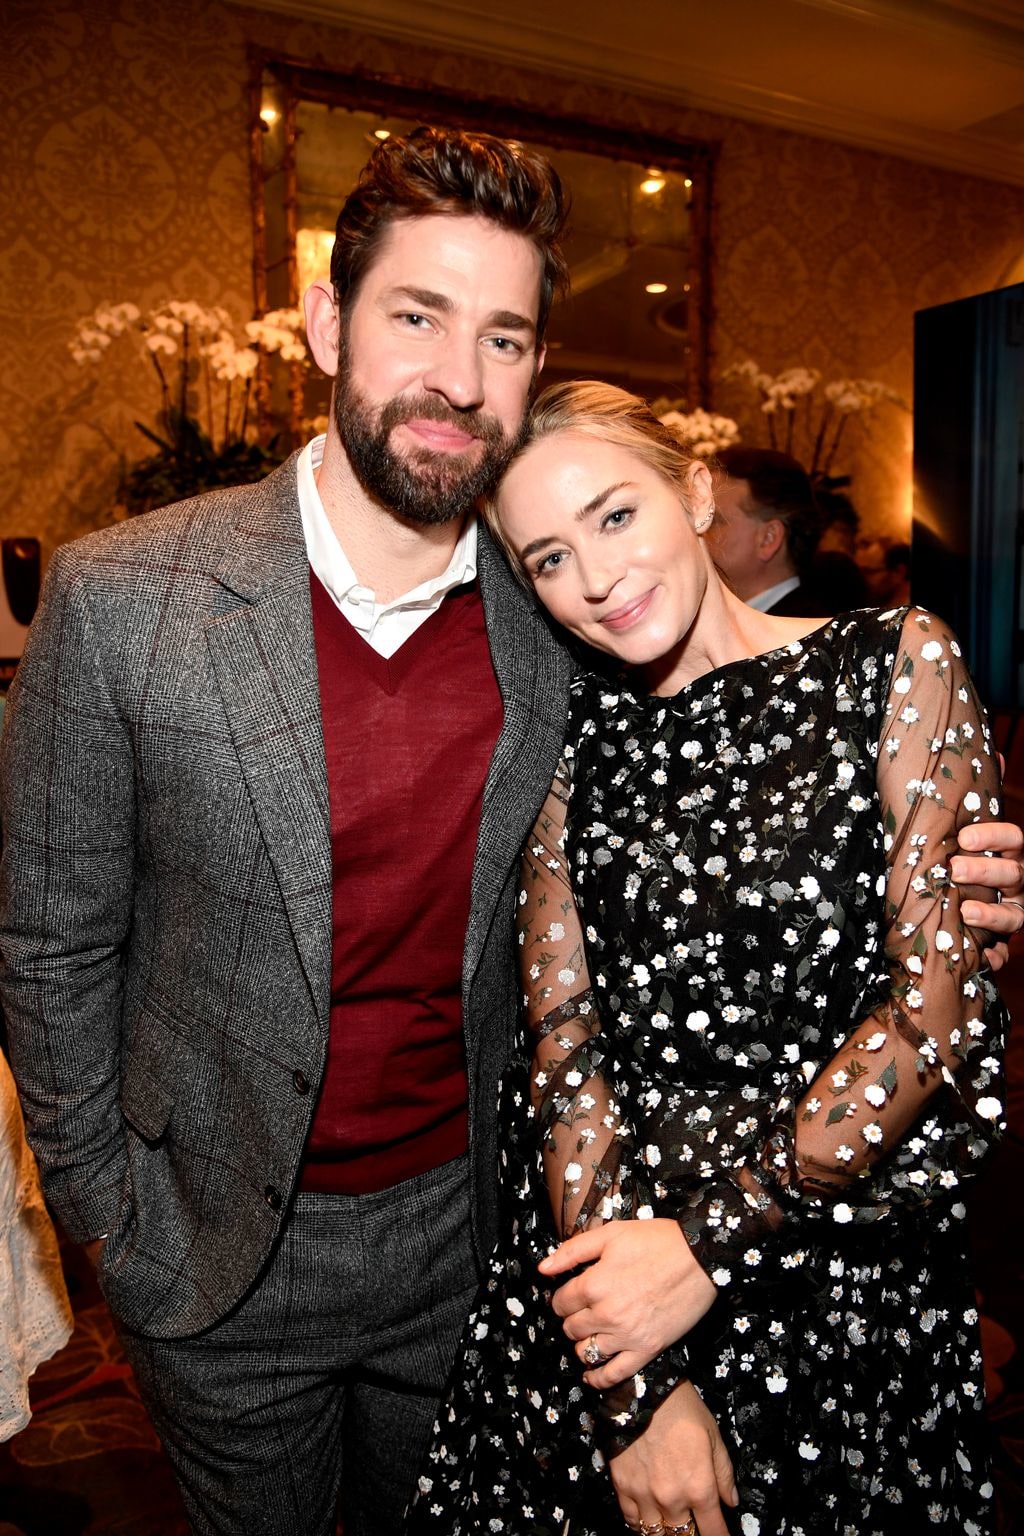 John Krasinski and Emily Blunt attend The BAFTA Los Angeles Tea Party at Four Seasons Hotel Los Angeles at Beverly Hills on January 5, 2019 in Los Angeles, California